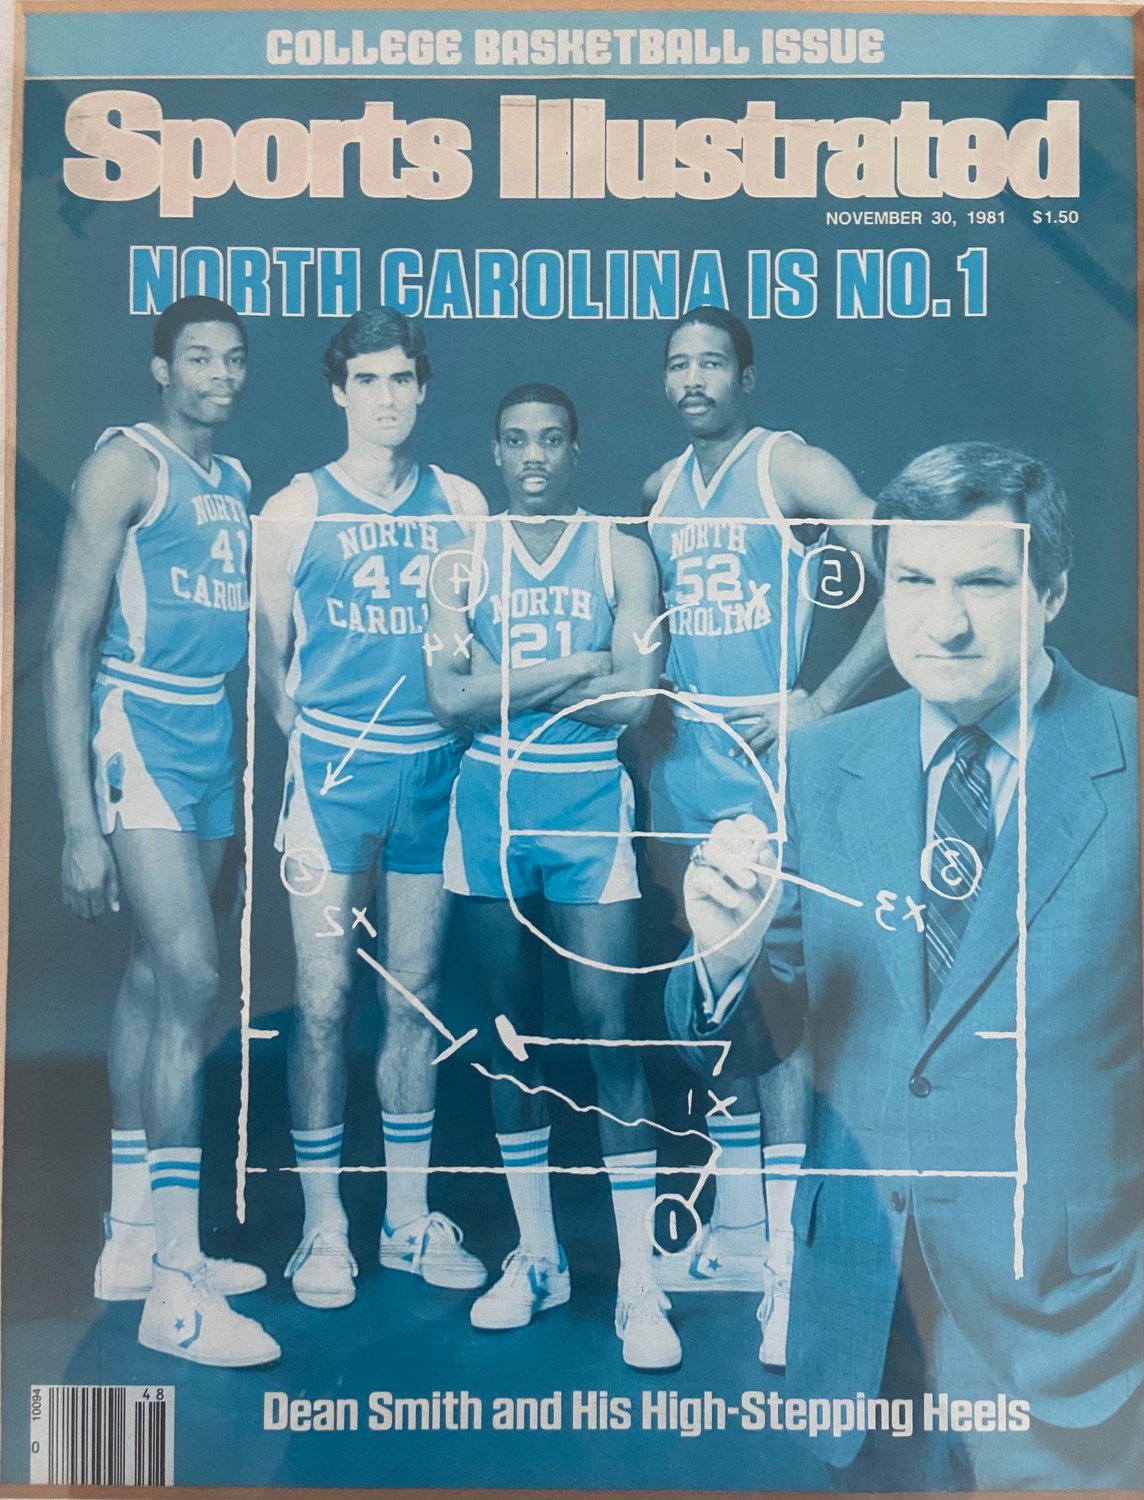 Former East Meadow resident Matt Doherty, second from near right, appeared on the cover of Sports Illustrated in 1981 with University of North Carolina teammates, from near right, Sam Perkins, Jimmy Black and James Worthy, and coach Dean Smith. They went on to win the NCAA men’s basketball championship in 1982.